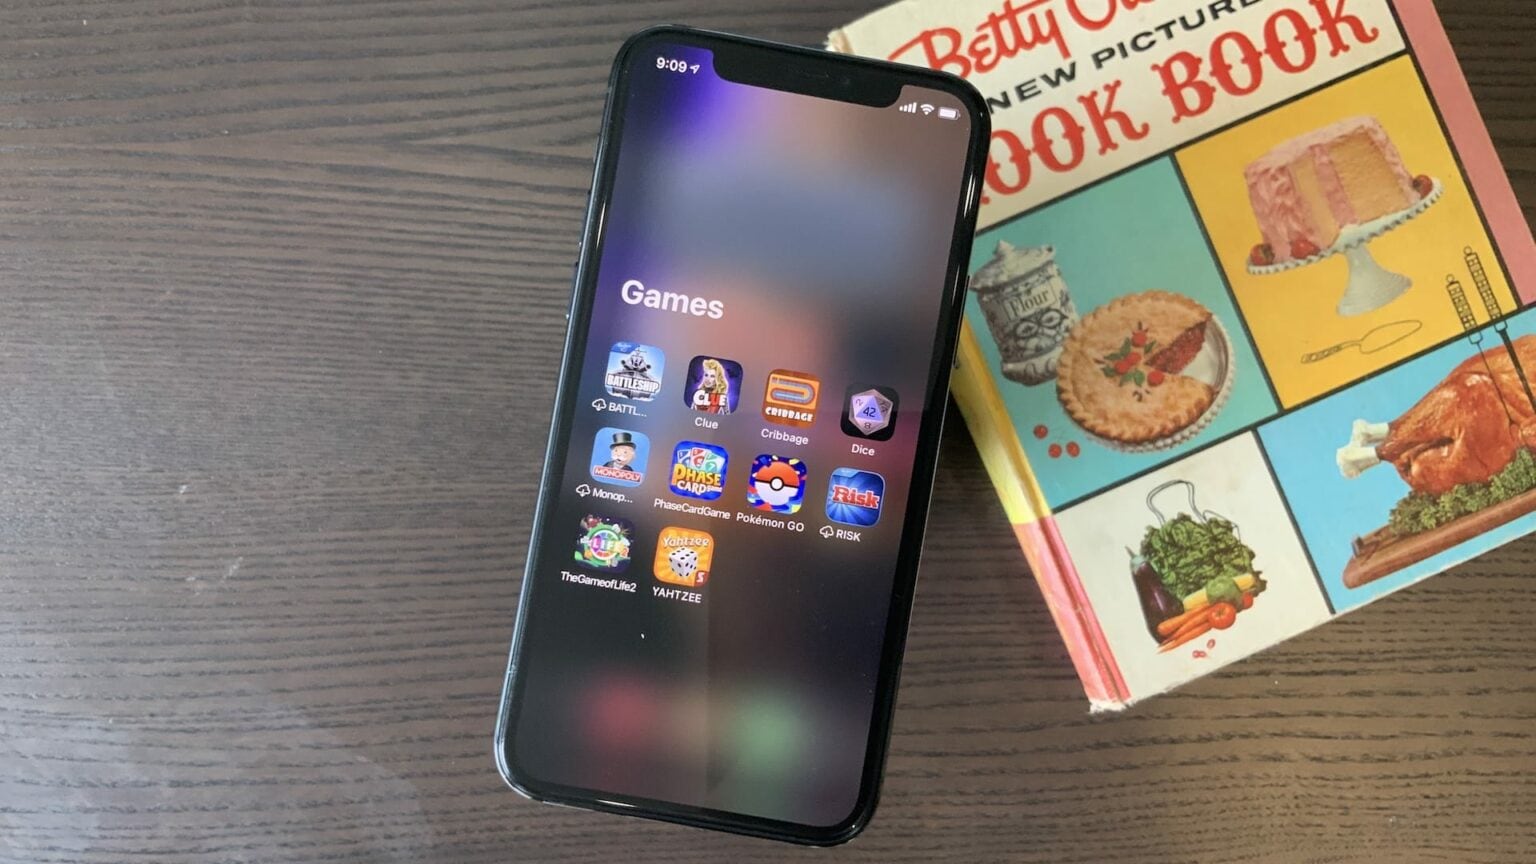 iOS Games on iPhone 11 Pro